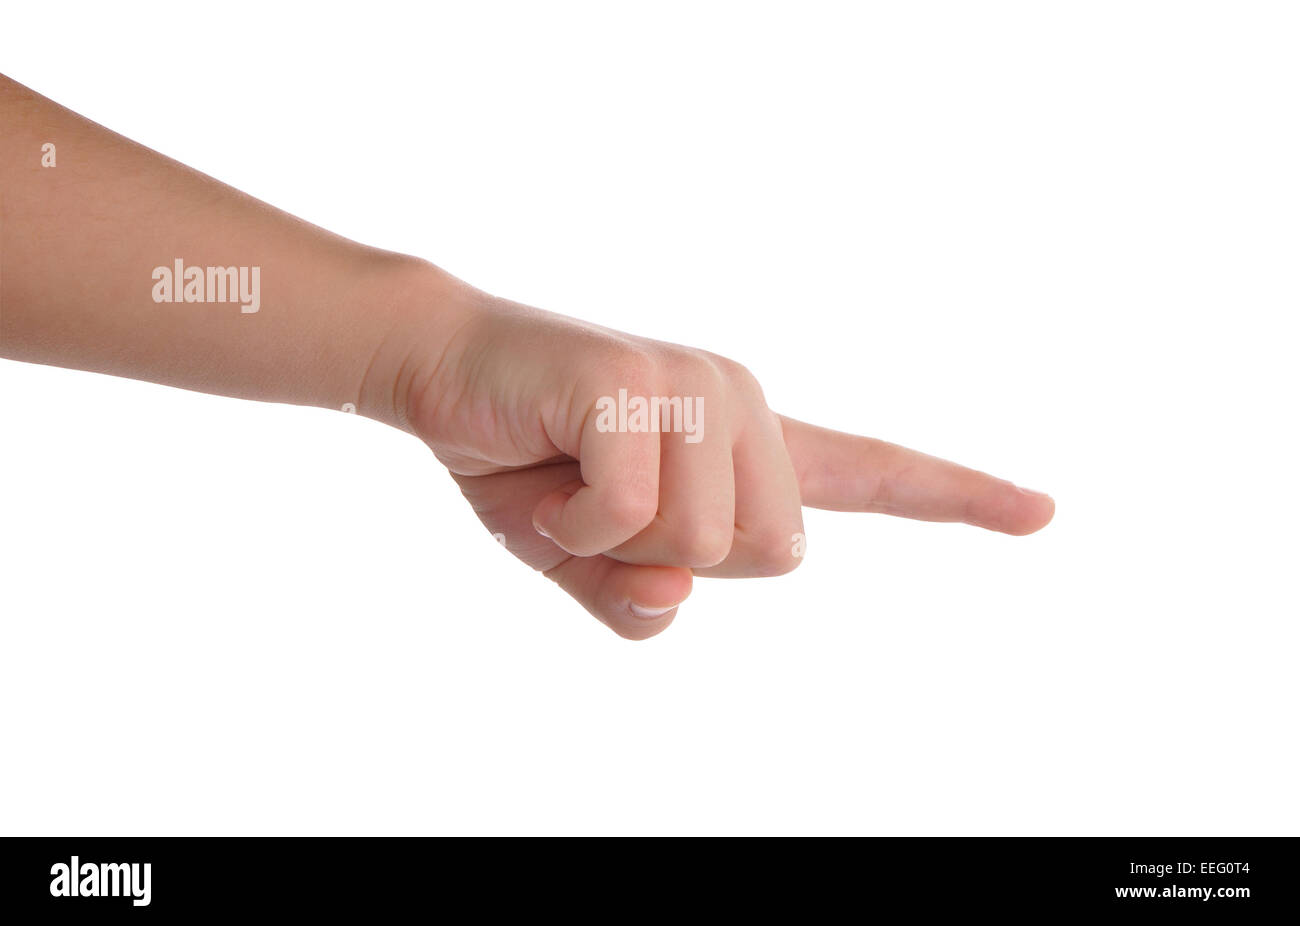 Index finger pointing isolated over white with clipping path included Stock Photo